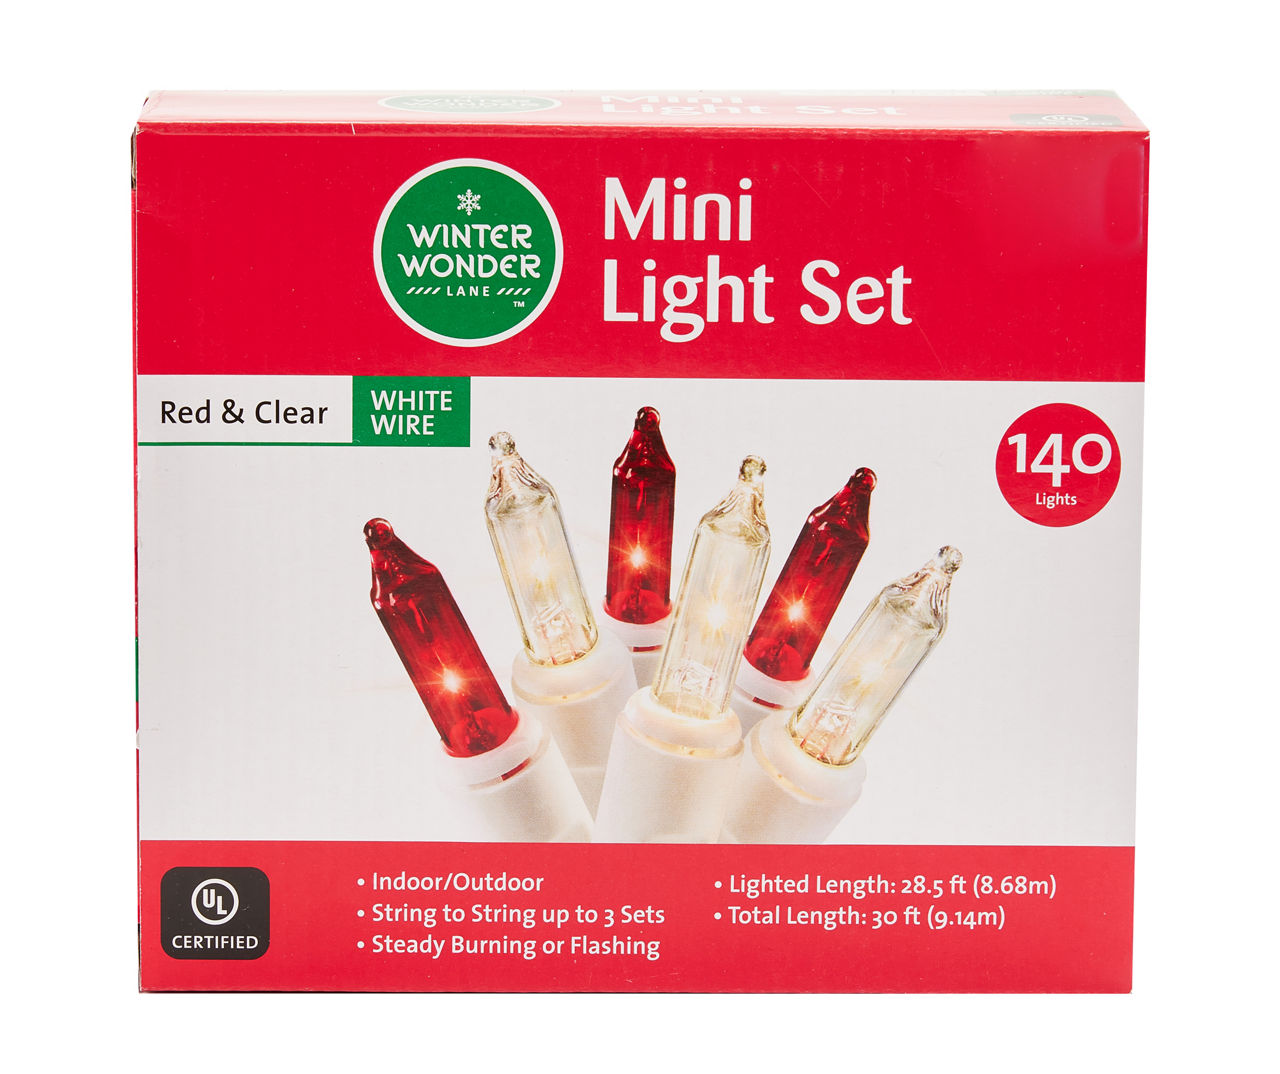 Winter Wonder Lane Red & Clear Mini Light Set with White Wire, 140 ...